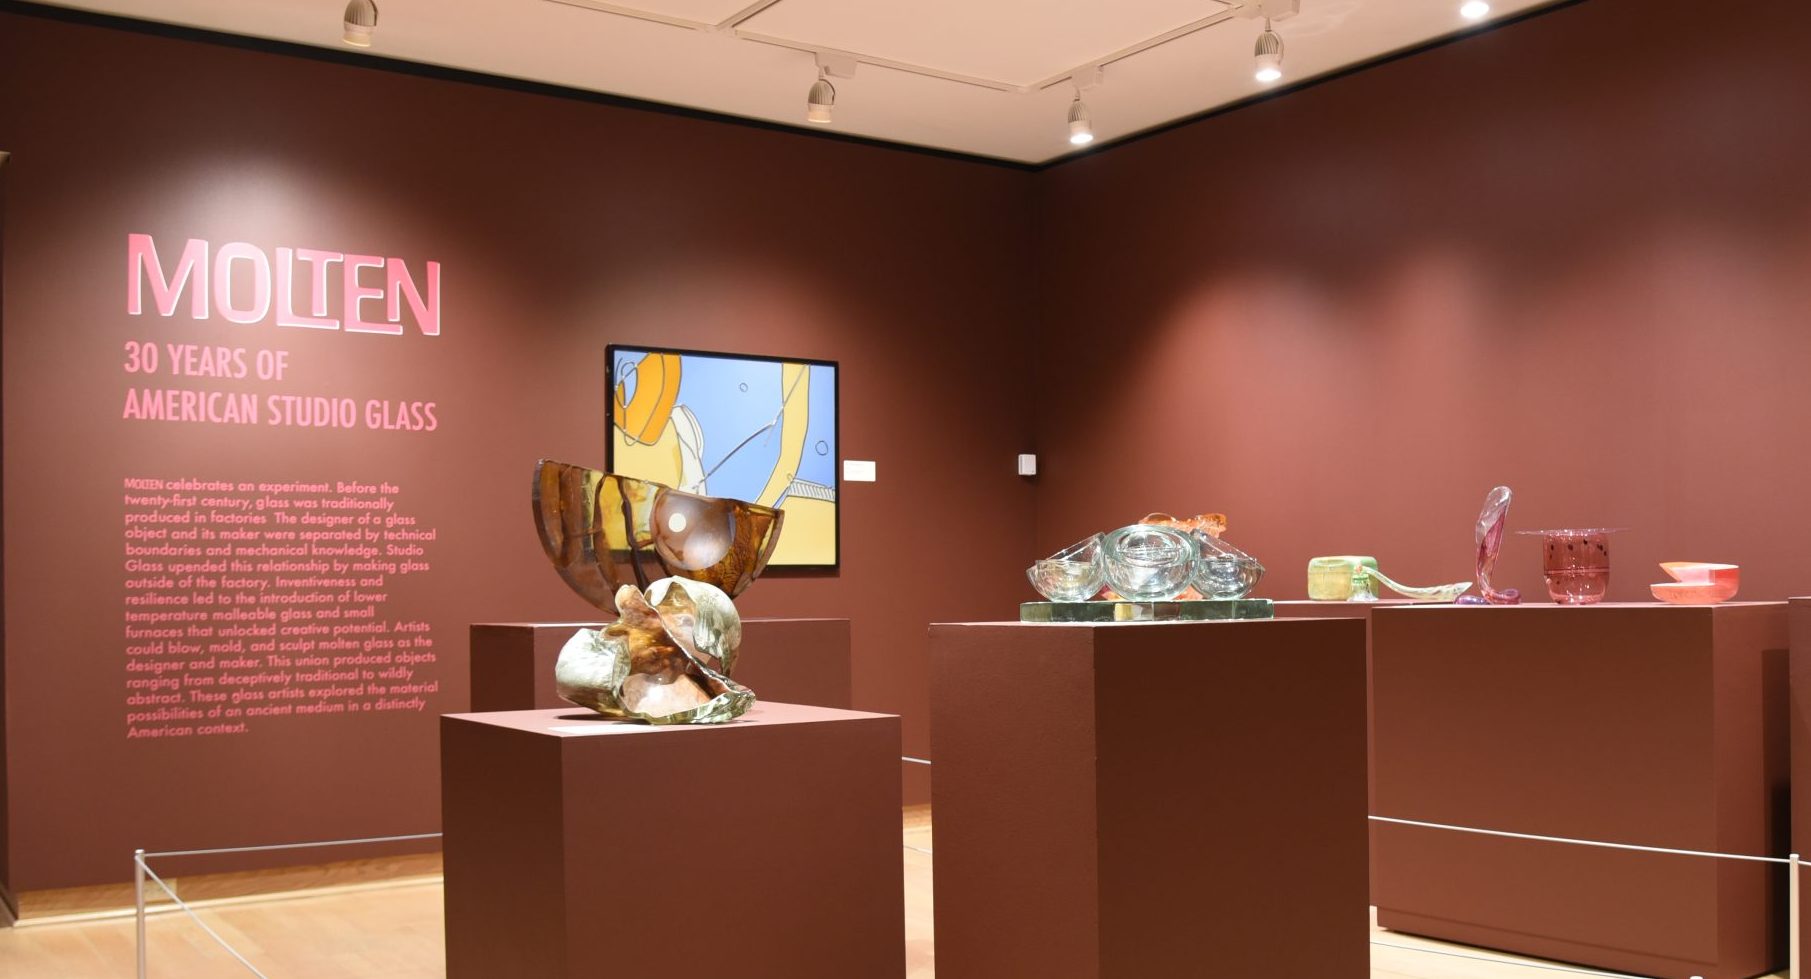 This image shows several abstract works of glass on pedestals in the foreground with the Molten exhibition text panel in the background